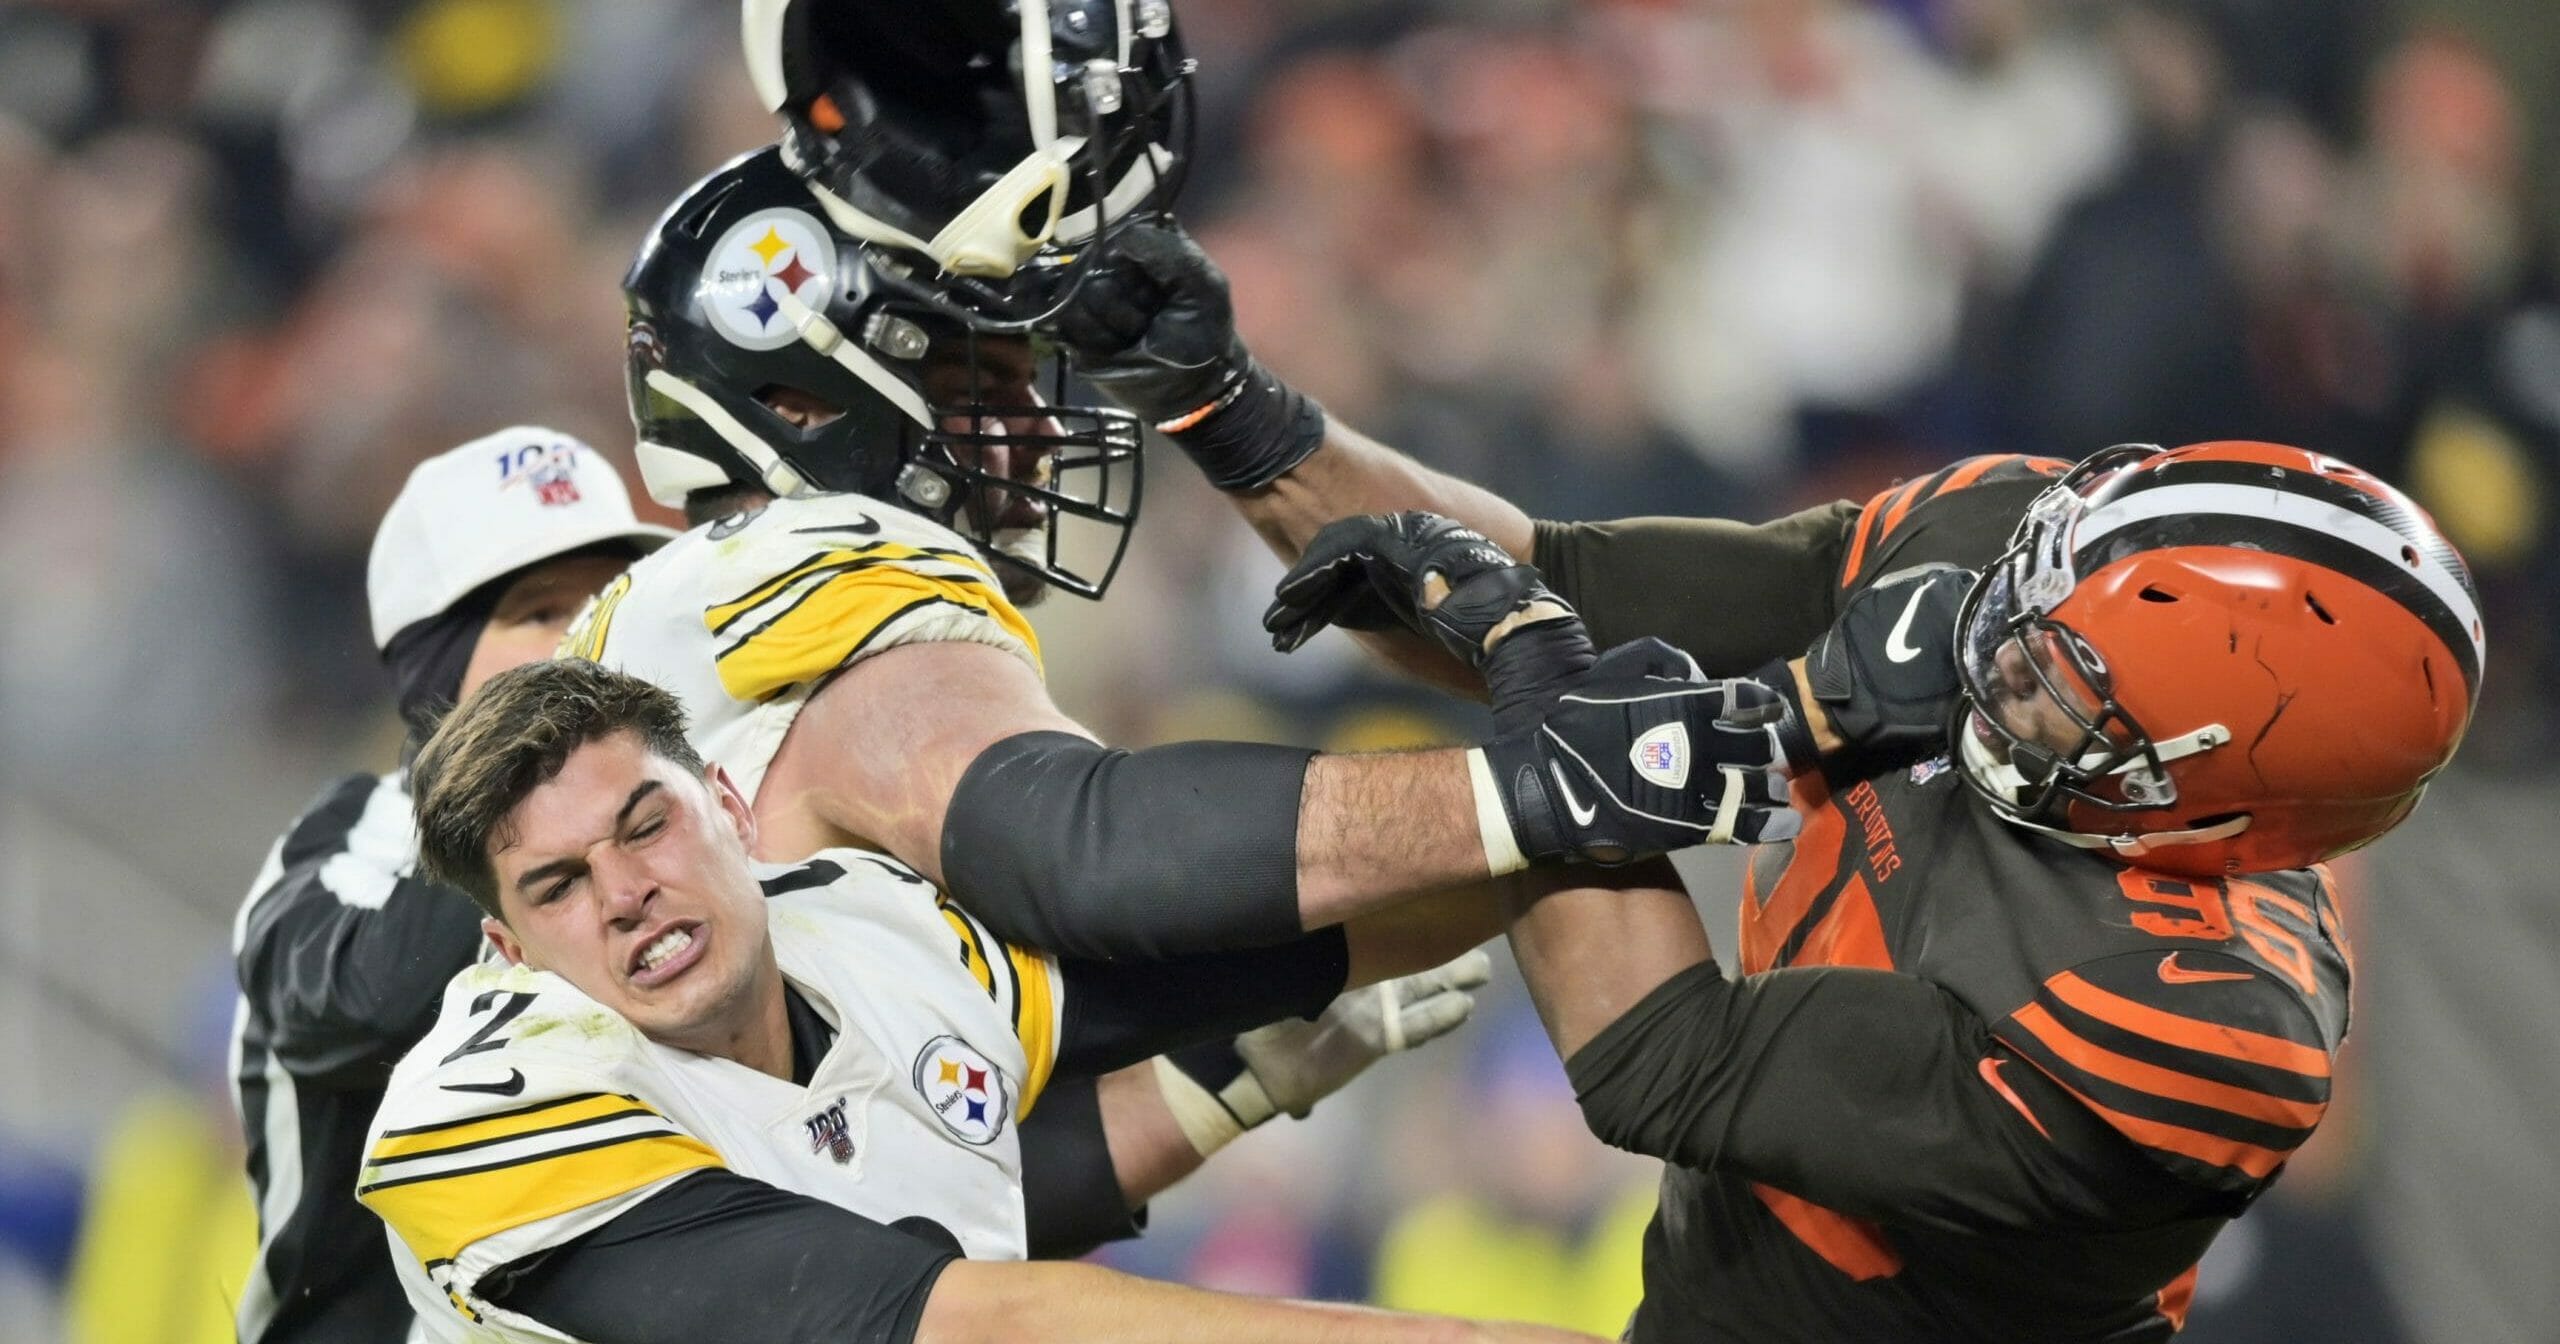 Cleveland Browns defensive end Myles Garrett (95) hits Pittsburgh Steelers quarterback Mason Rudolph (2) with a helmet during the second half of an NFL football game on Nov. 14, 2019, in Cleveland.